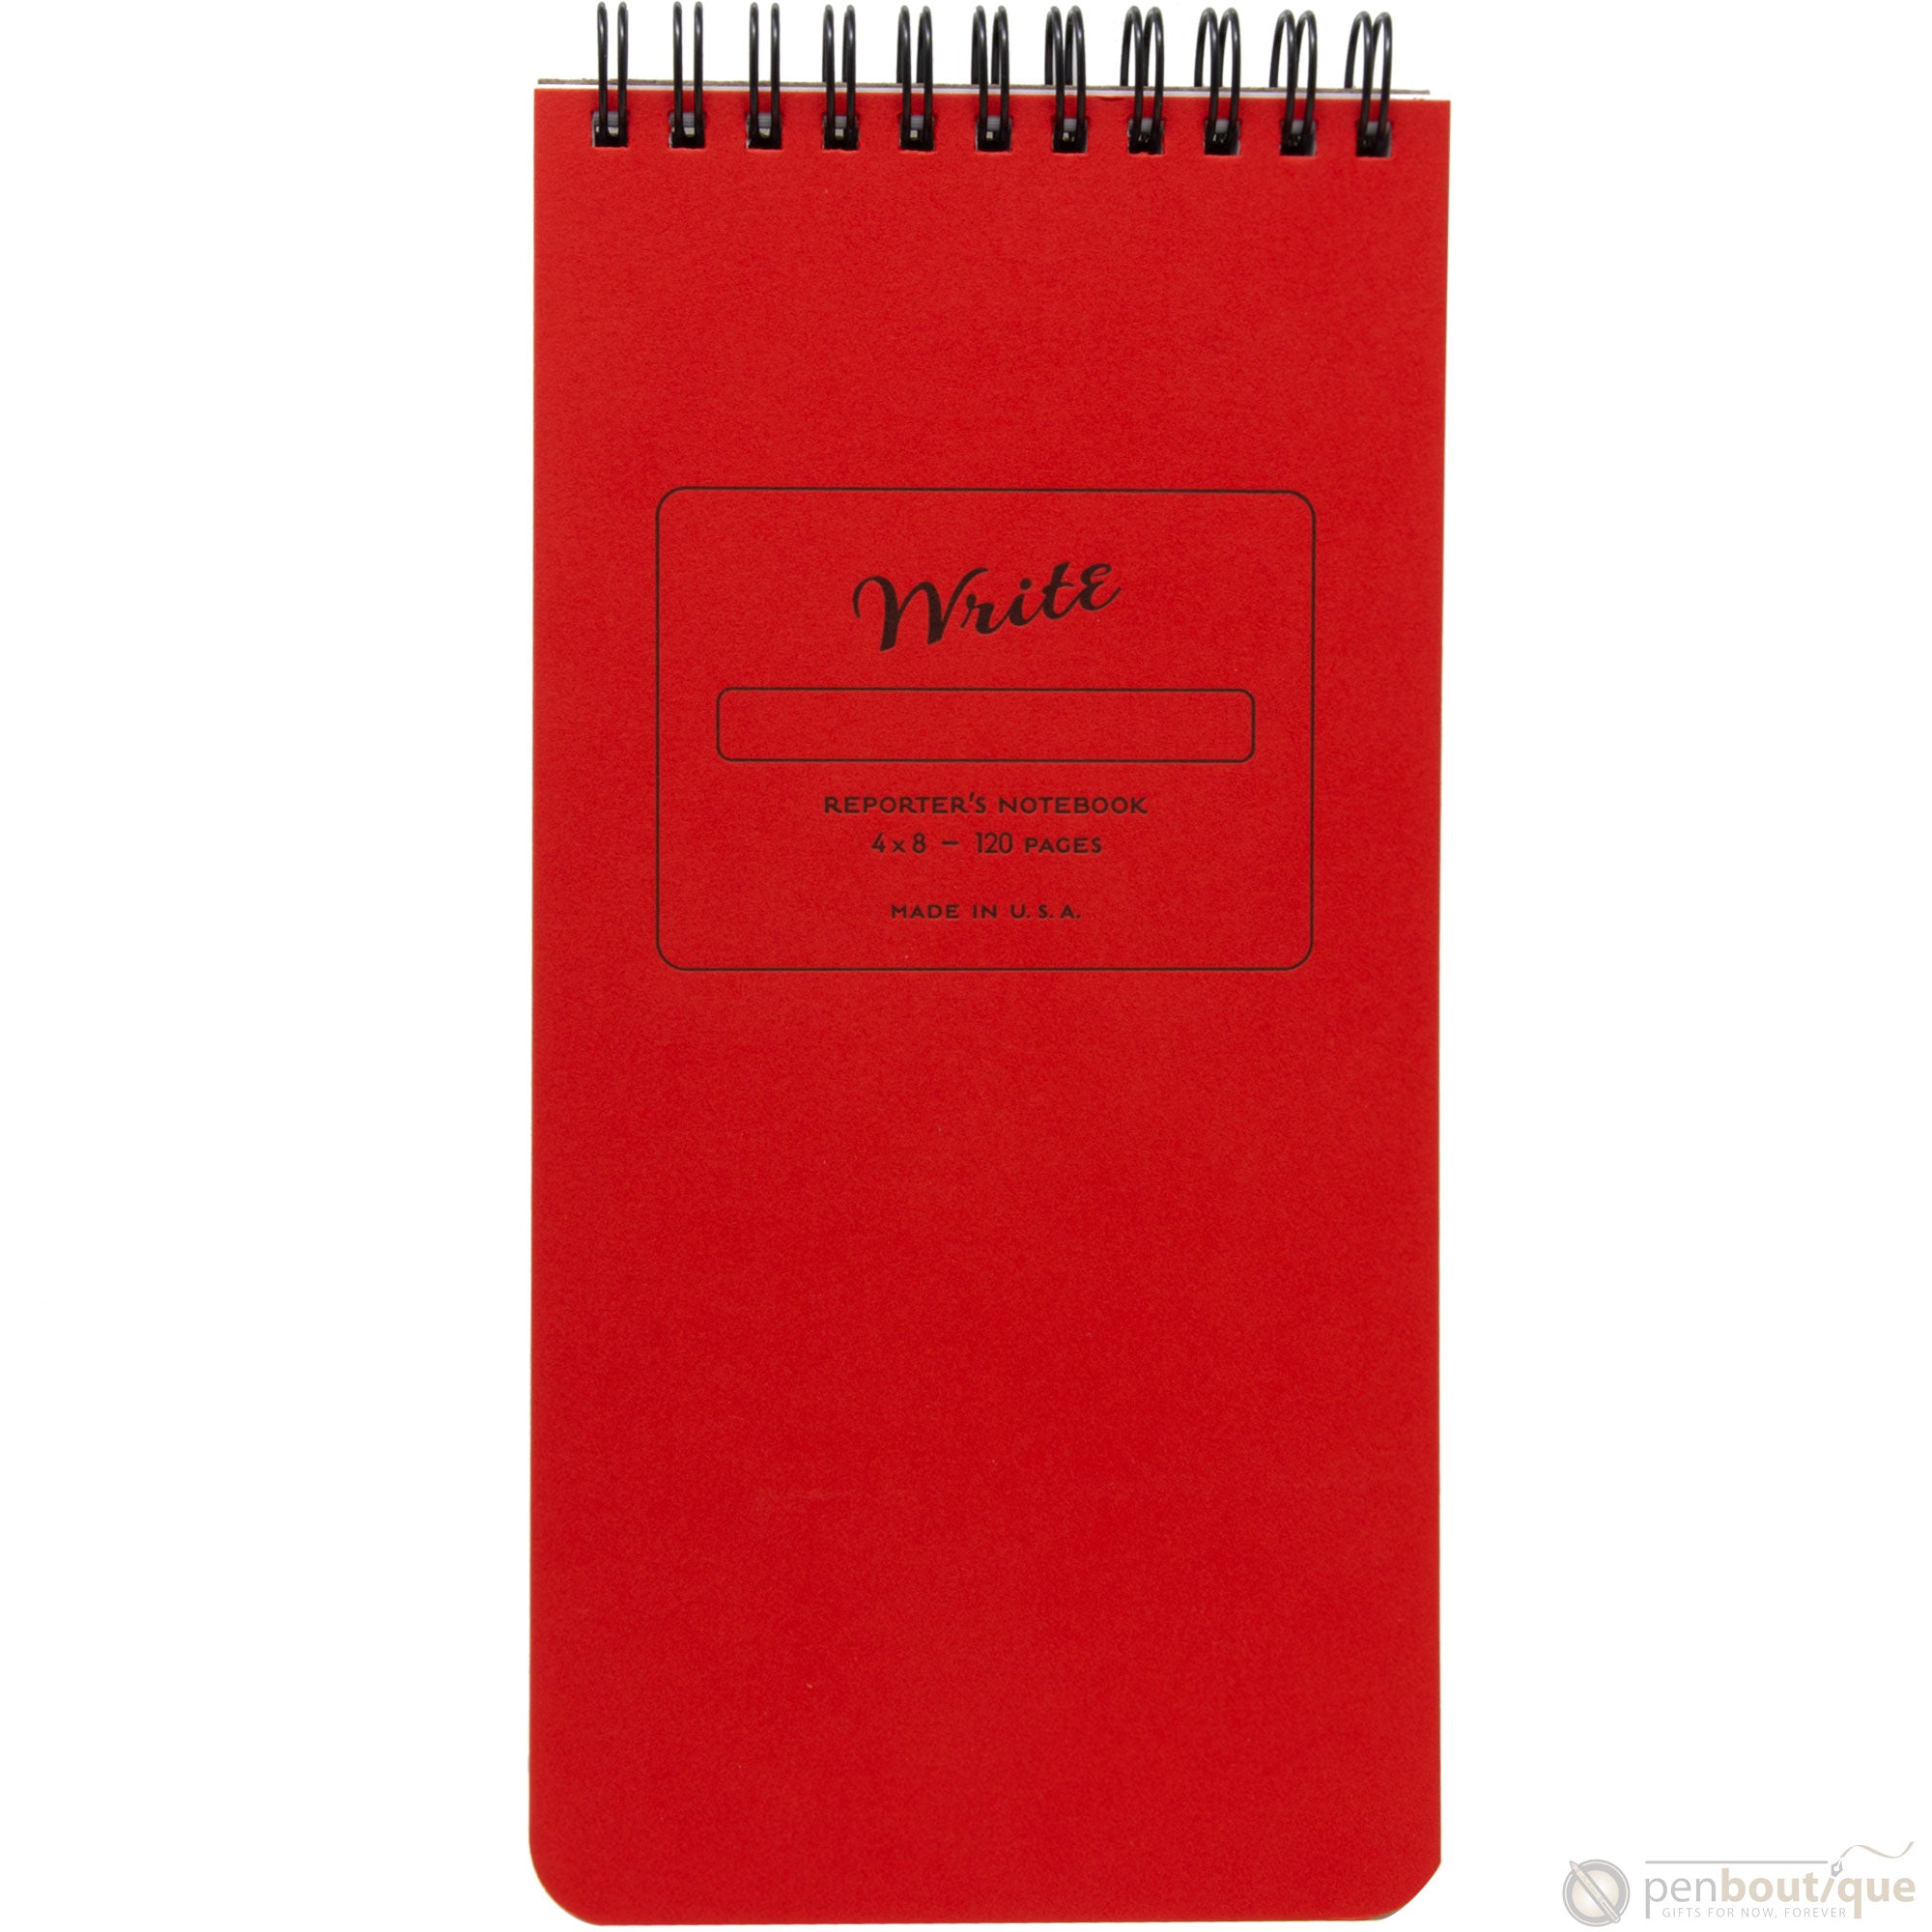 Write Notepads & Co. Notebook - Reporter - Red-Pen Boutique Ltd